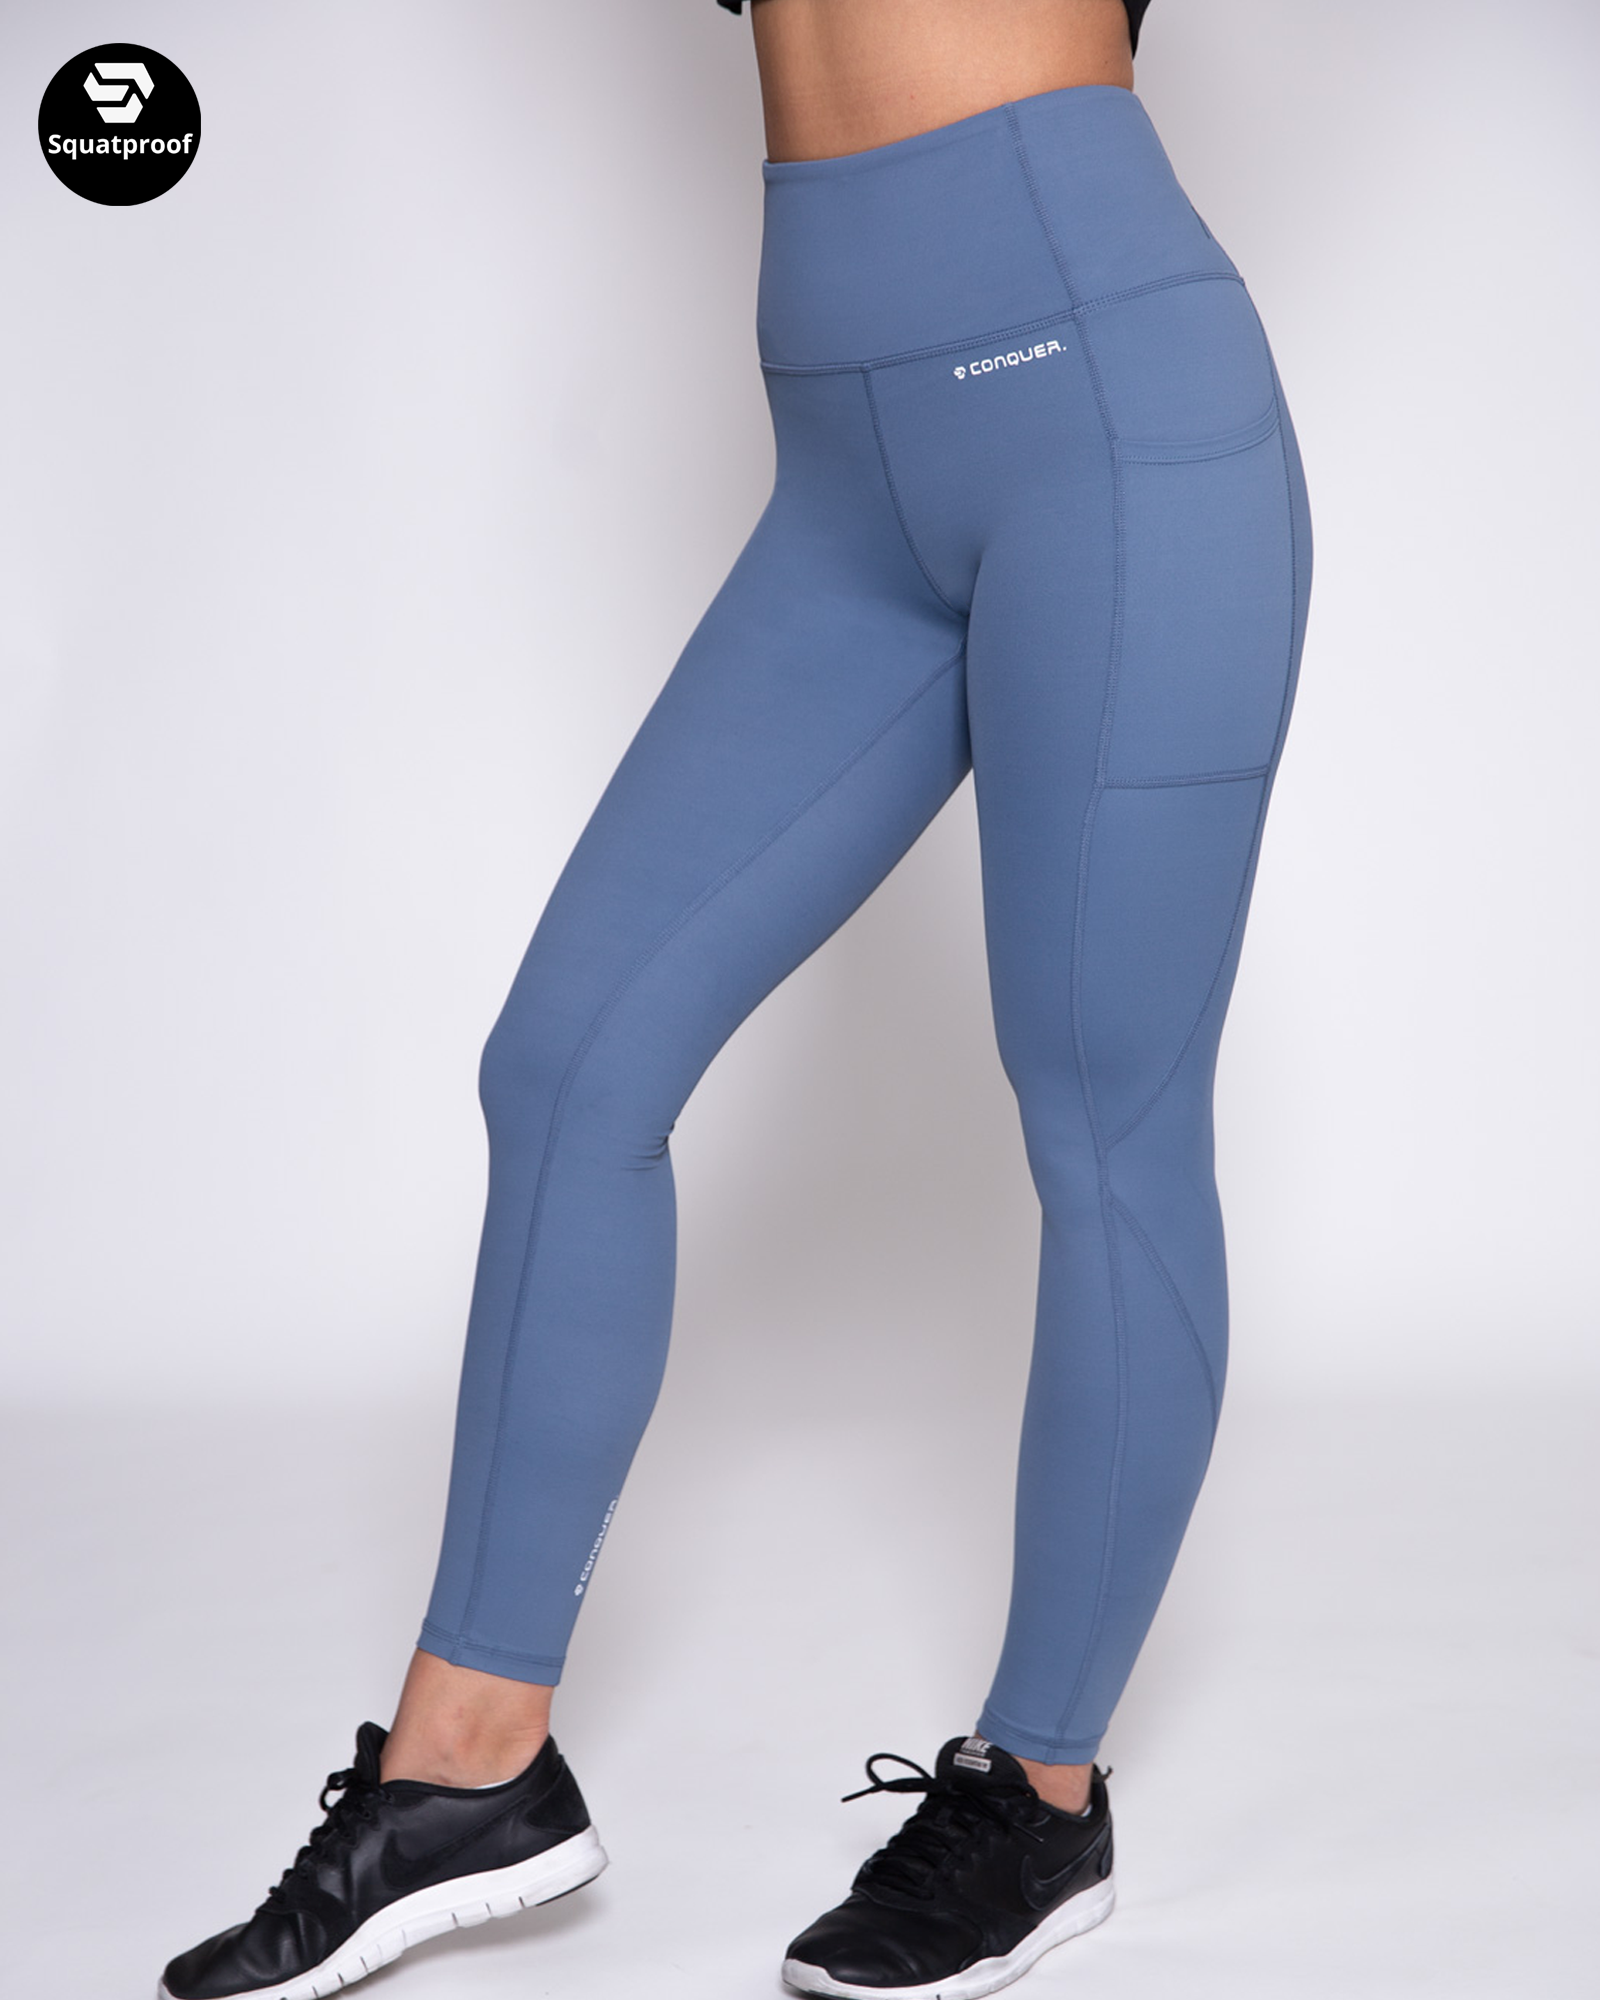 Conquer Double Pocket Legging - Blue – Conquer Performance Wear